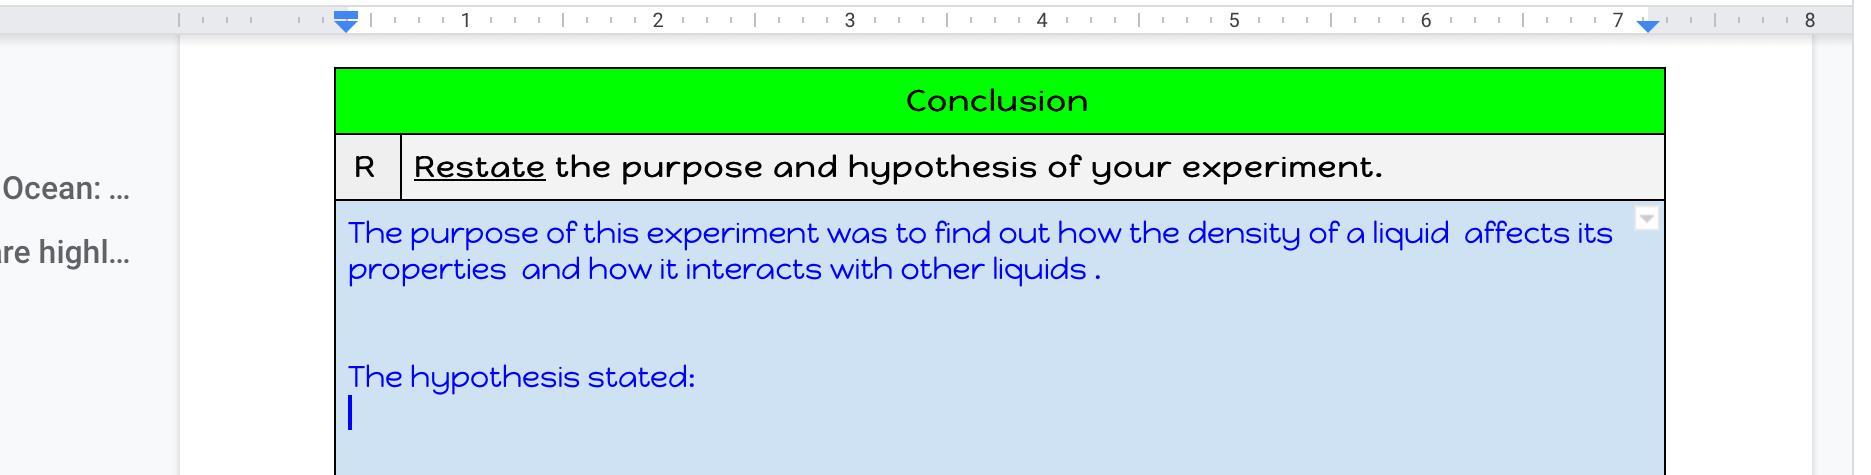 Fill In The Space Where It Says Hypothesis Stated Look In The Photo I Dont Have That Much TimeThe Purpose